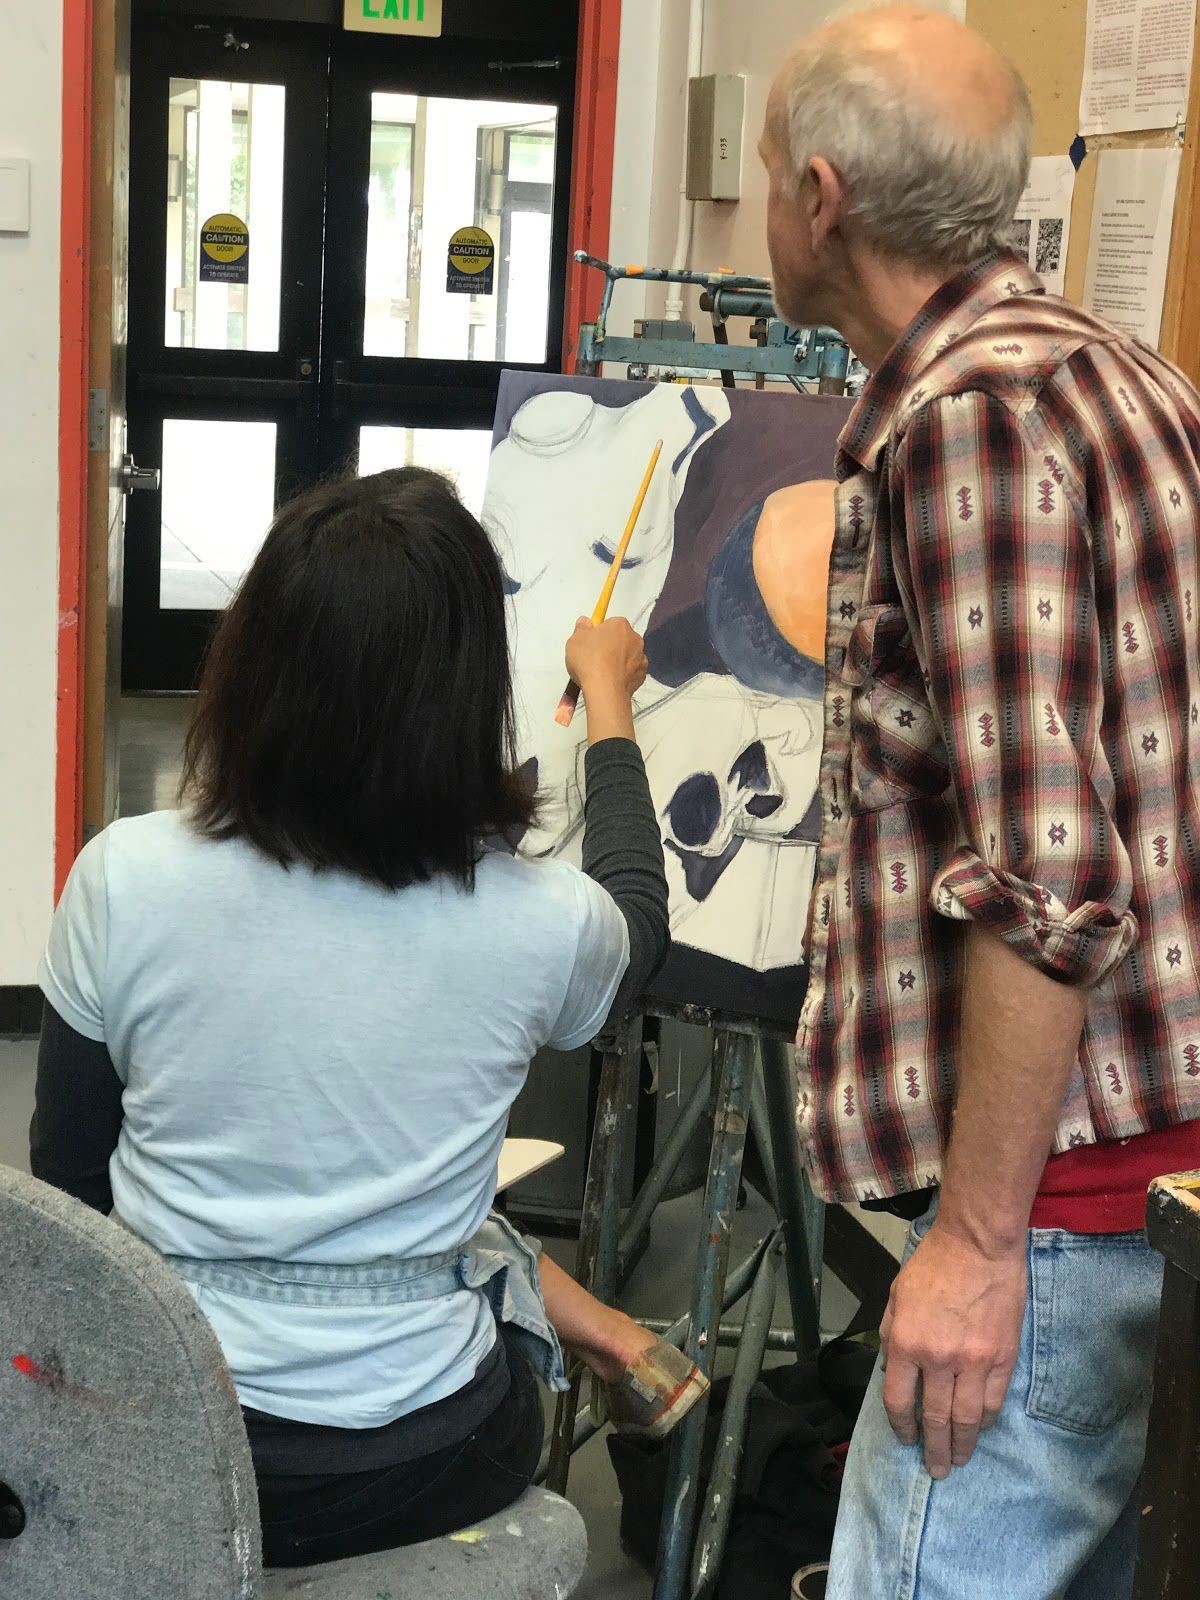 The instructor, Andrew Leone, is guiding a student and helping her pick the best colors to use. Photo taken on Sep. ?, 2017 by Jasmine 